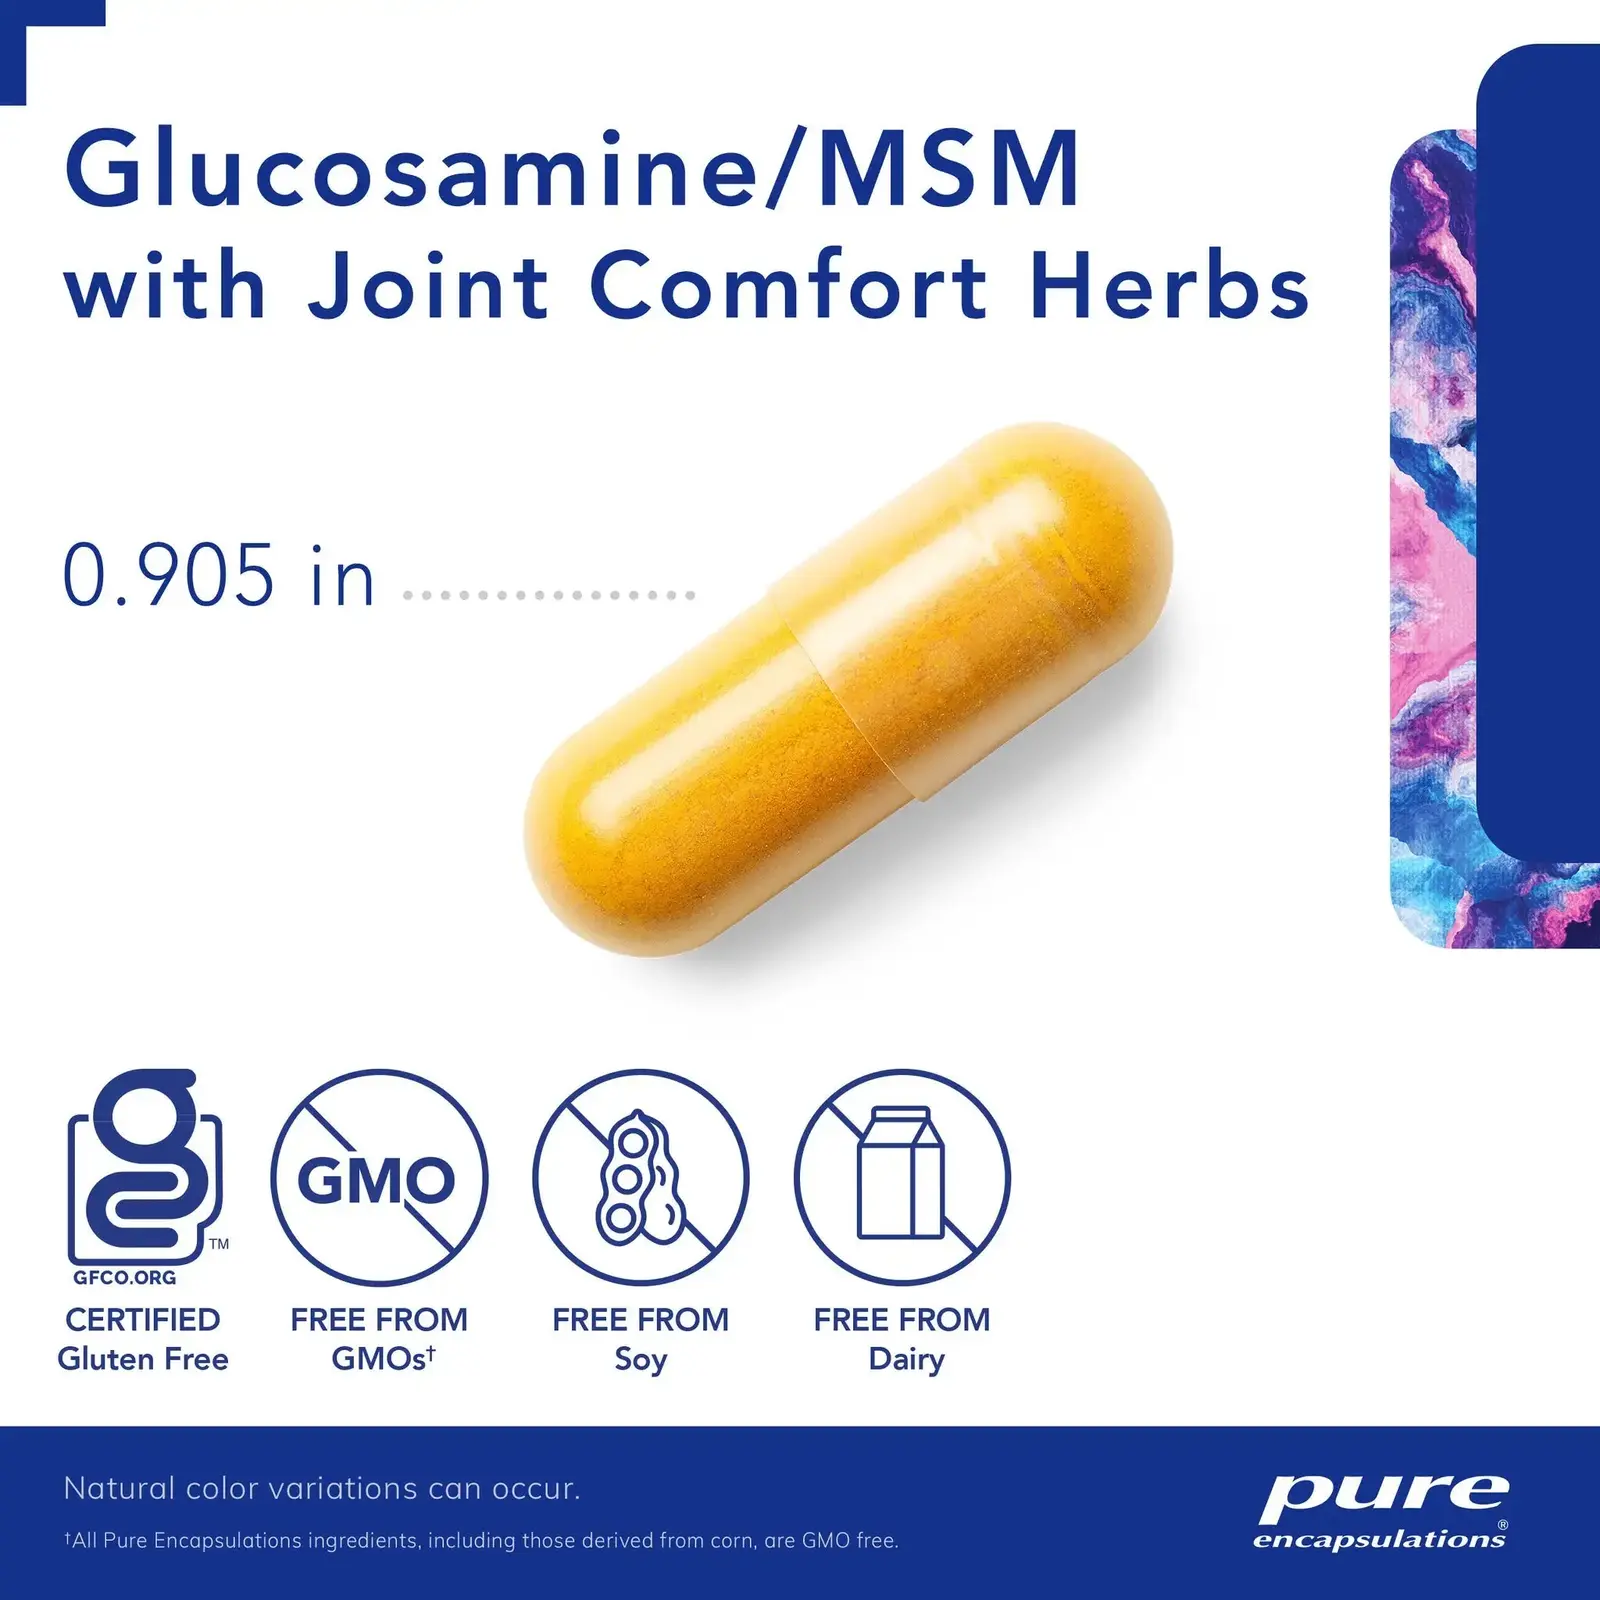 Glucosamine/MSM with joint comfort herbs